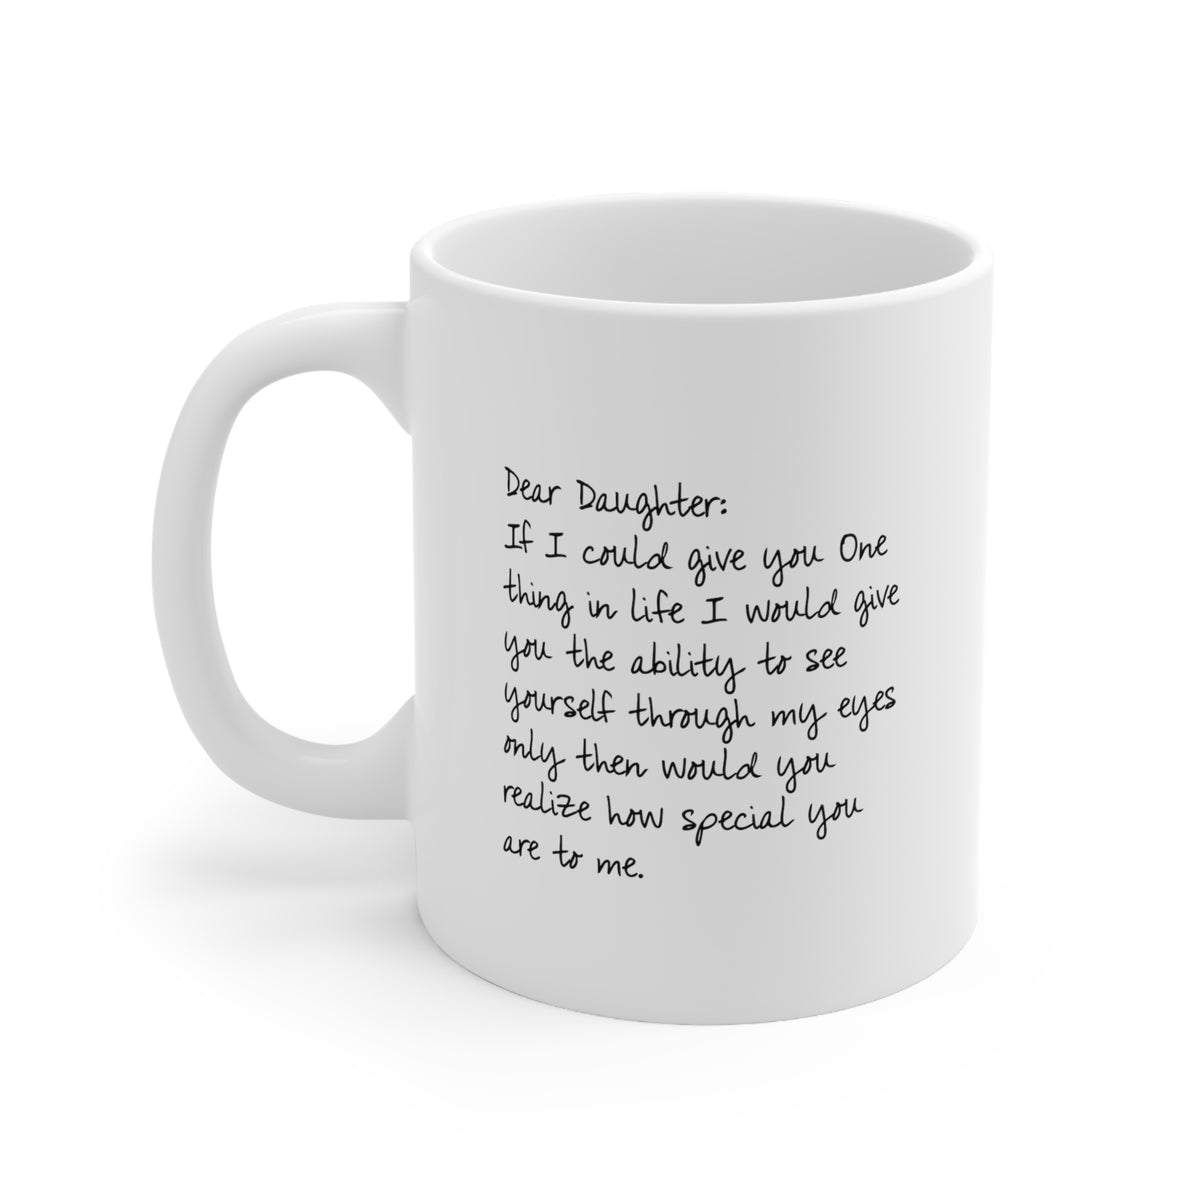 Funny Father Gifts From Daughter - Dear Daughter, If I Could Give You One Thing In Life I Would Give You The Ability To See Yourself Through My Eyes